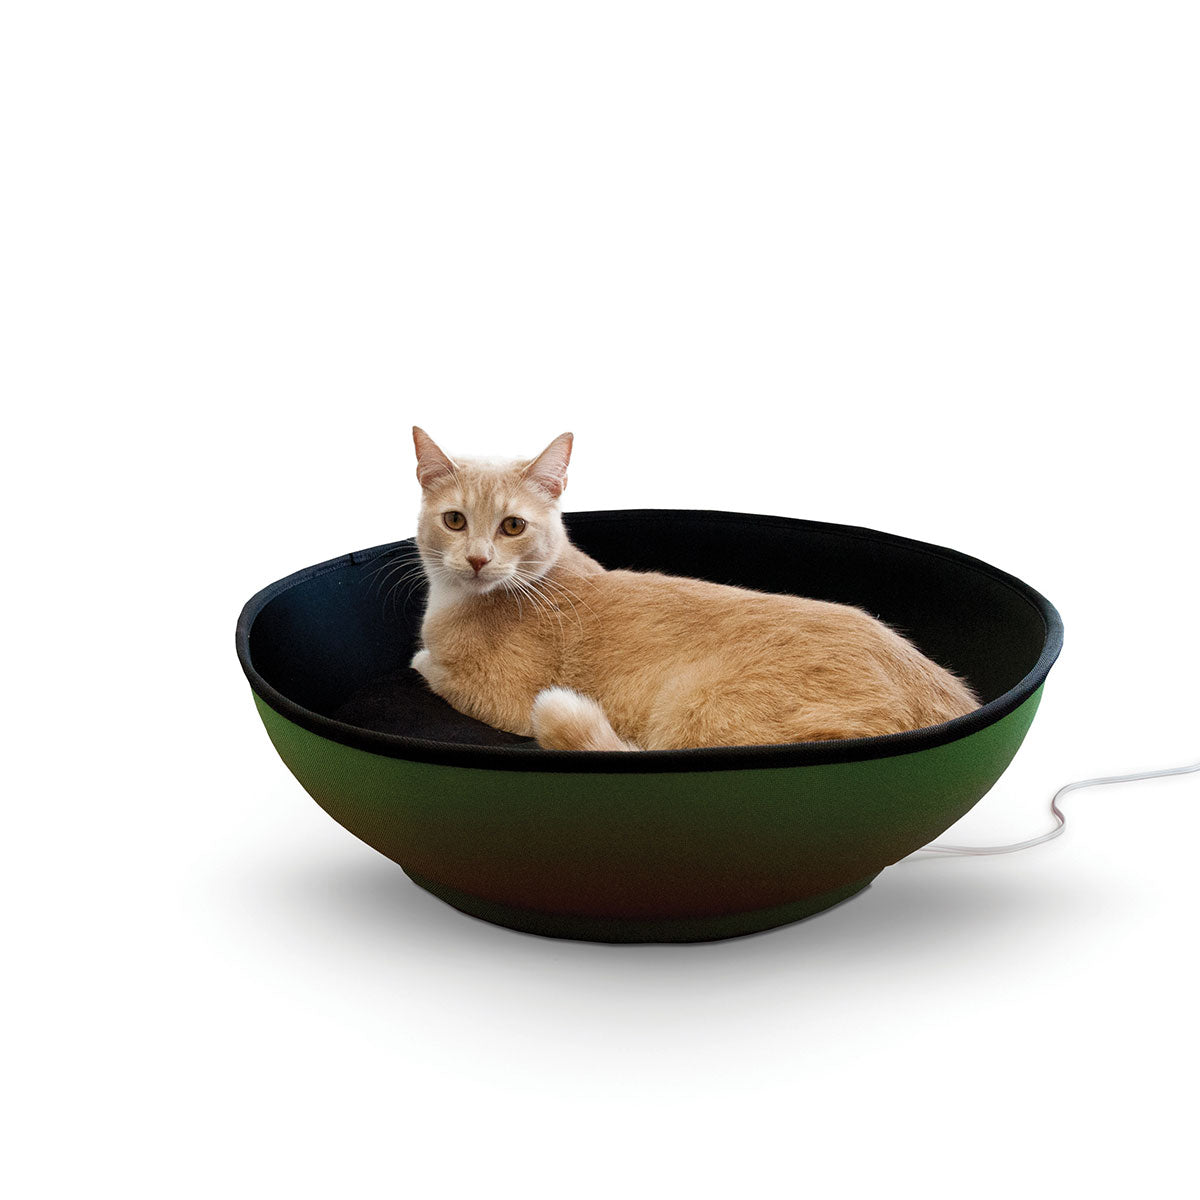 K&h Pet Products Kh5392 Thermo-mod Half-pod Pet Bed